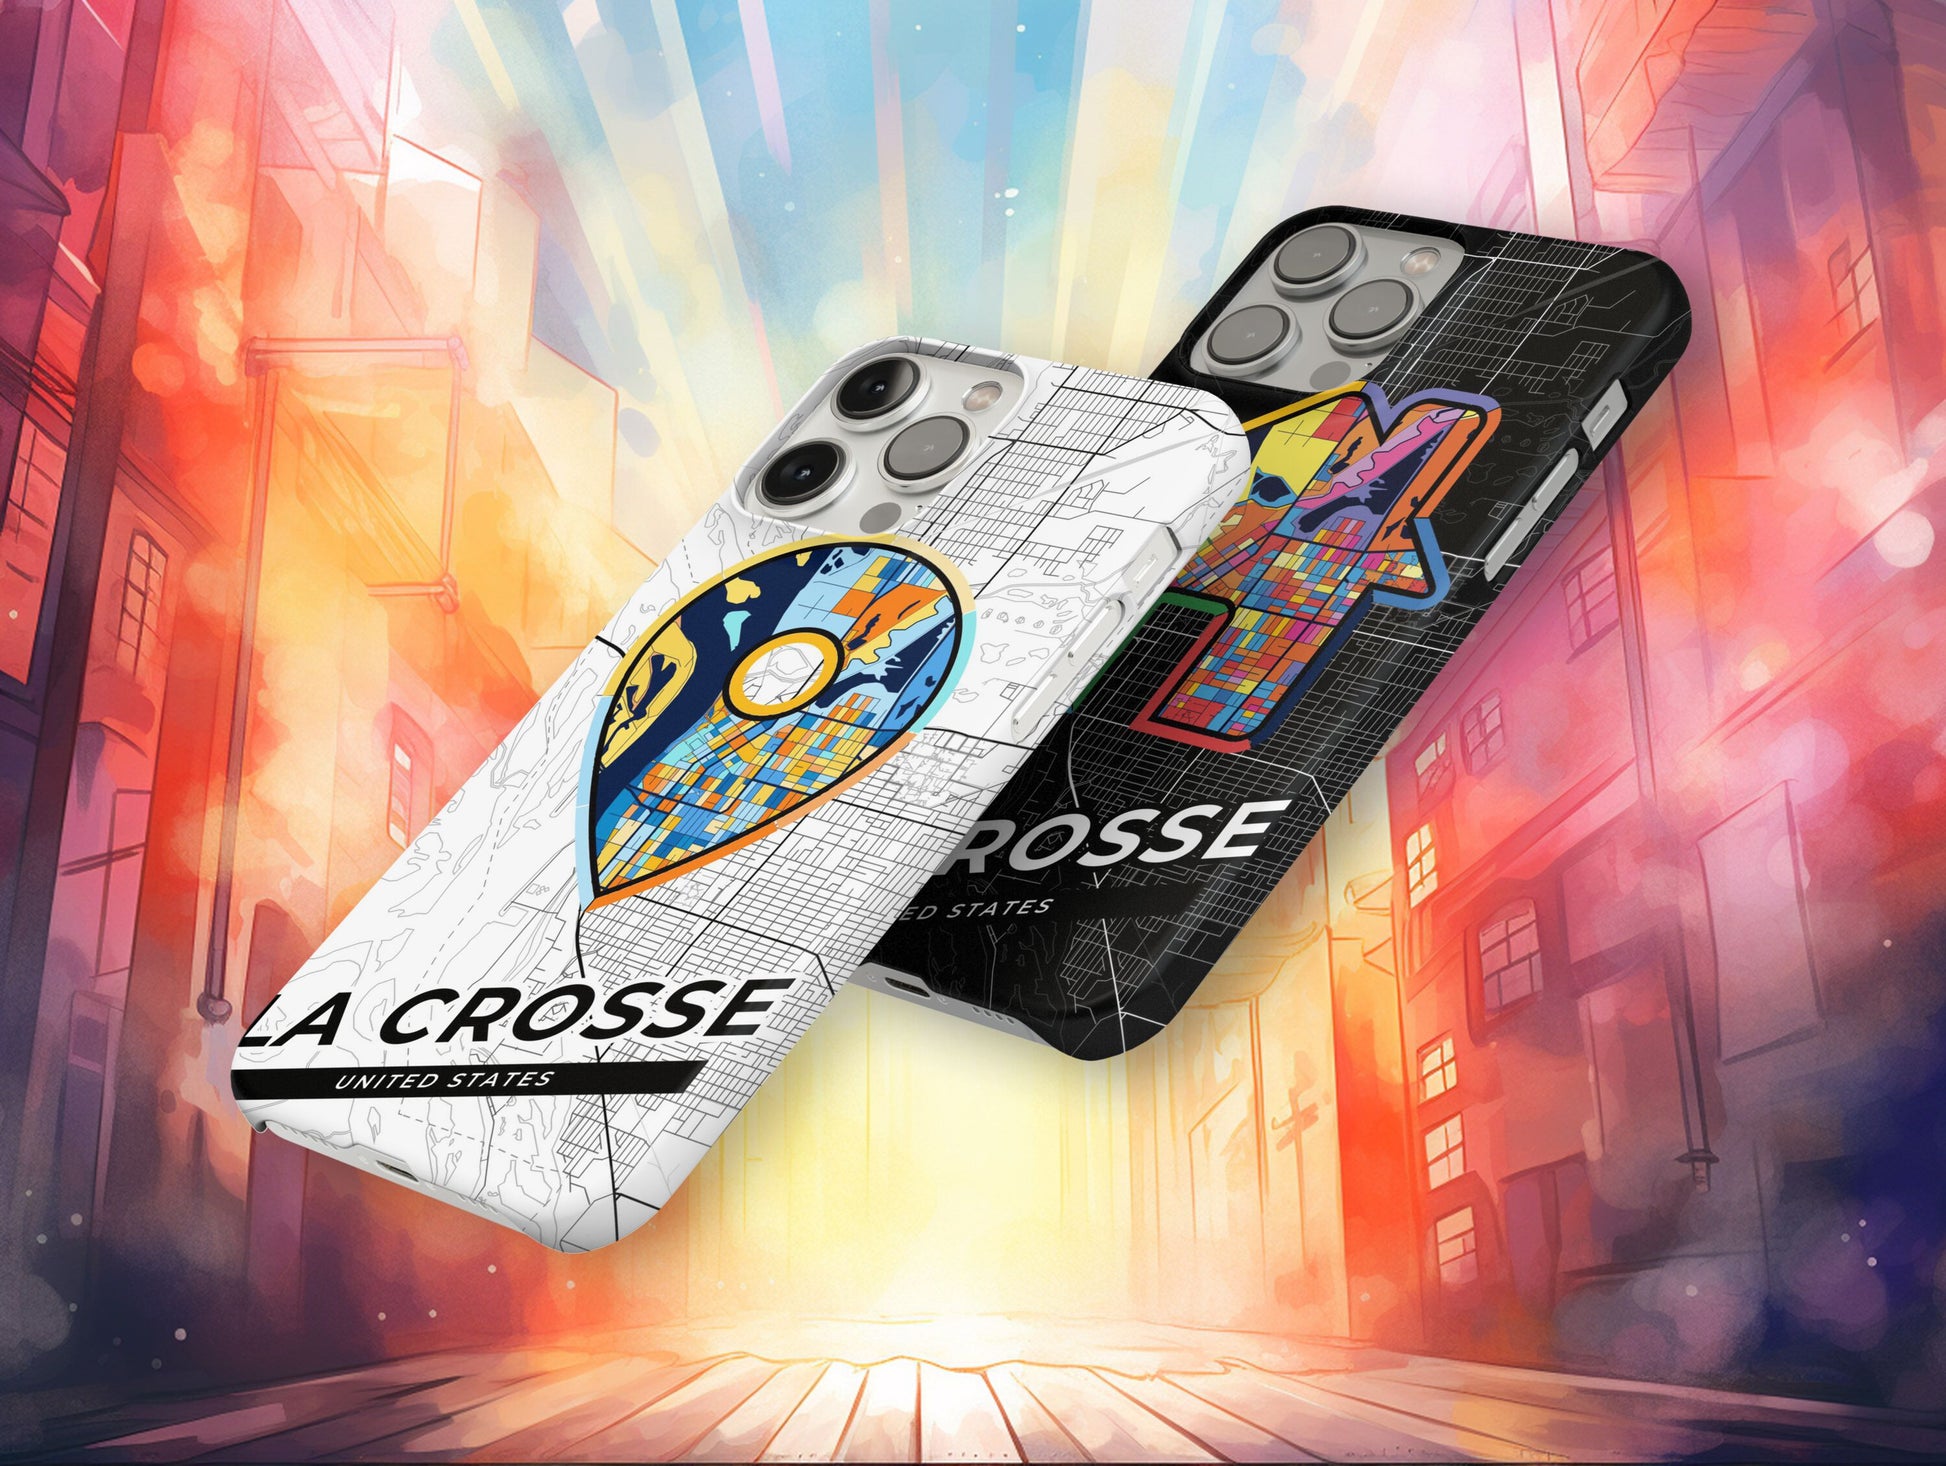 La Crosse Wisconsin slim phone case with colorful icon. Birthday, wedding or housewarming gift. Couple match cases.